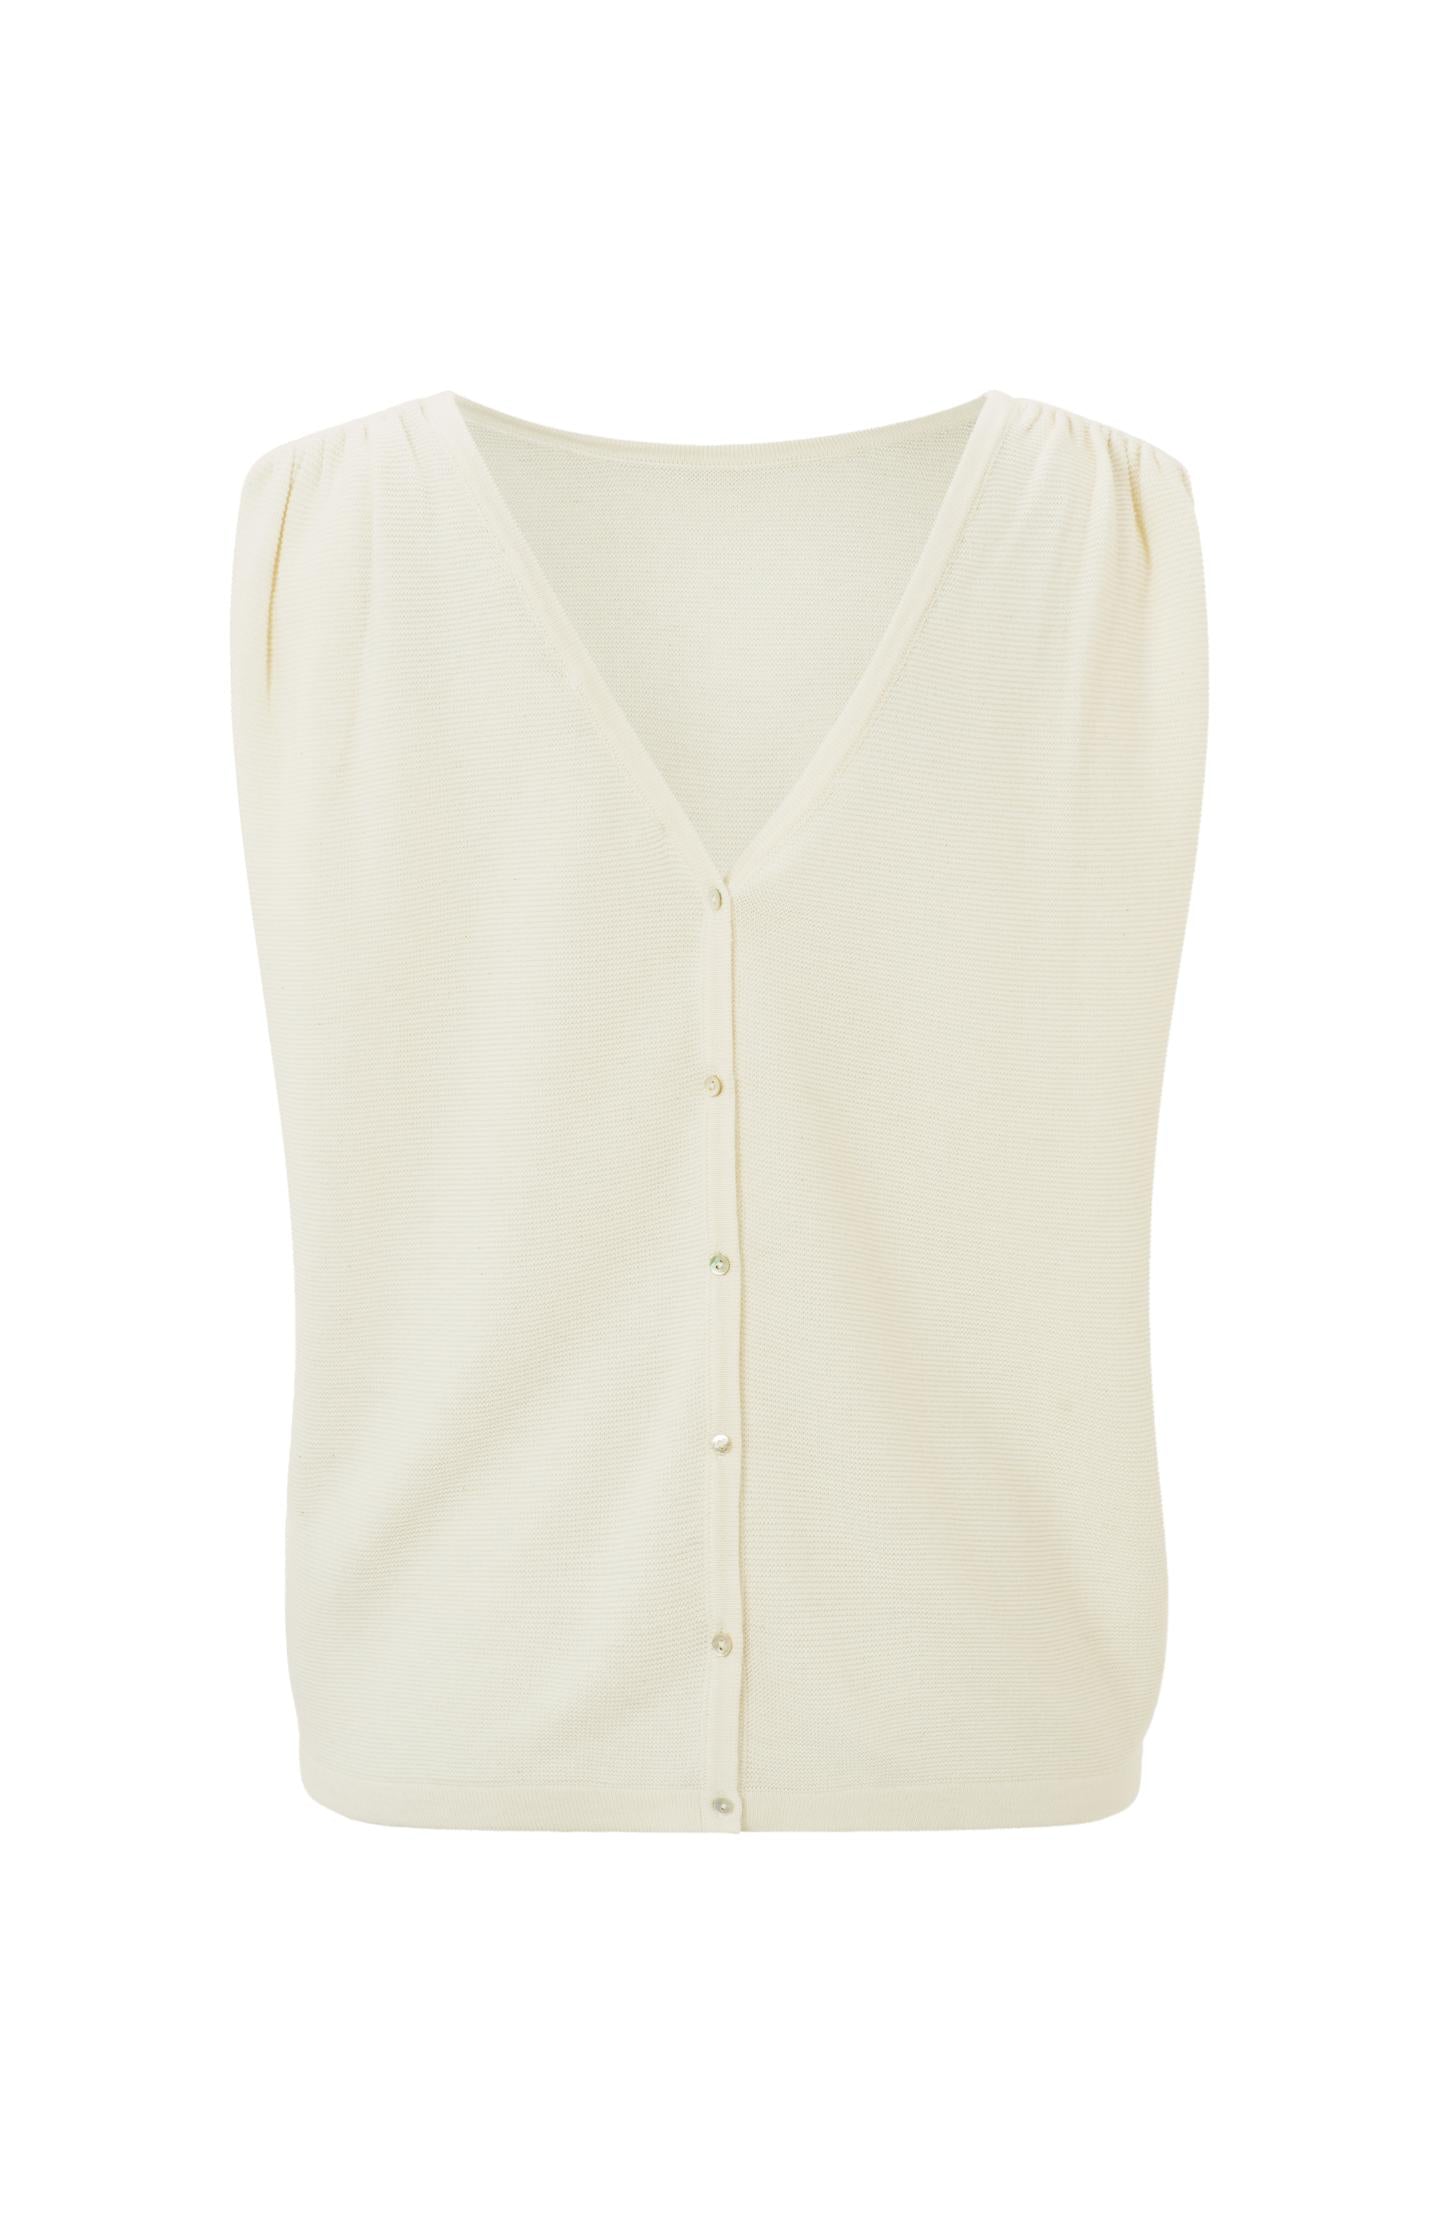 Sleeveless sweater with boat neck and button on back